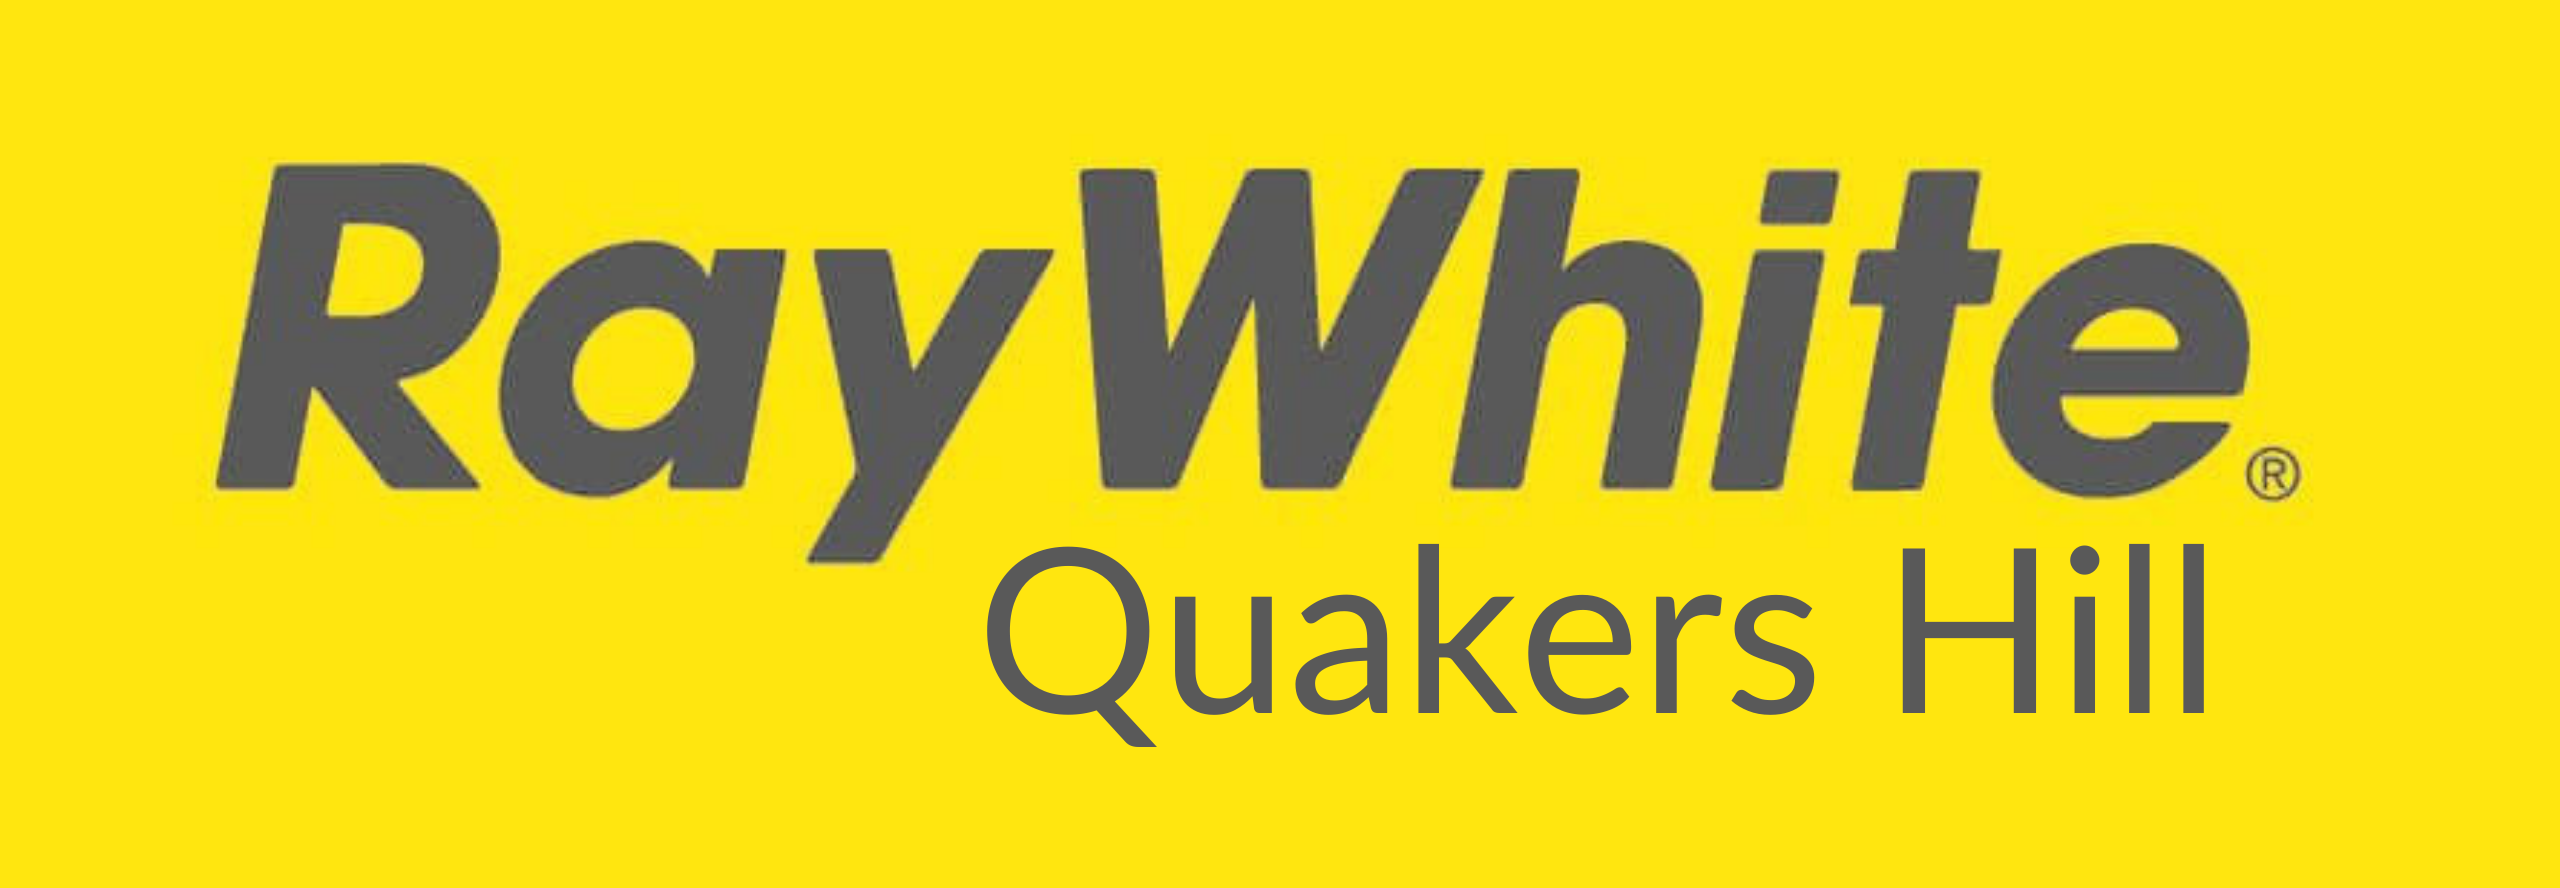 Ray White Quakers Hill.png